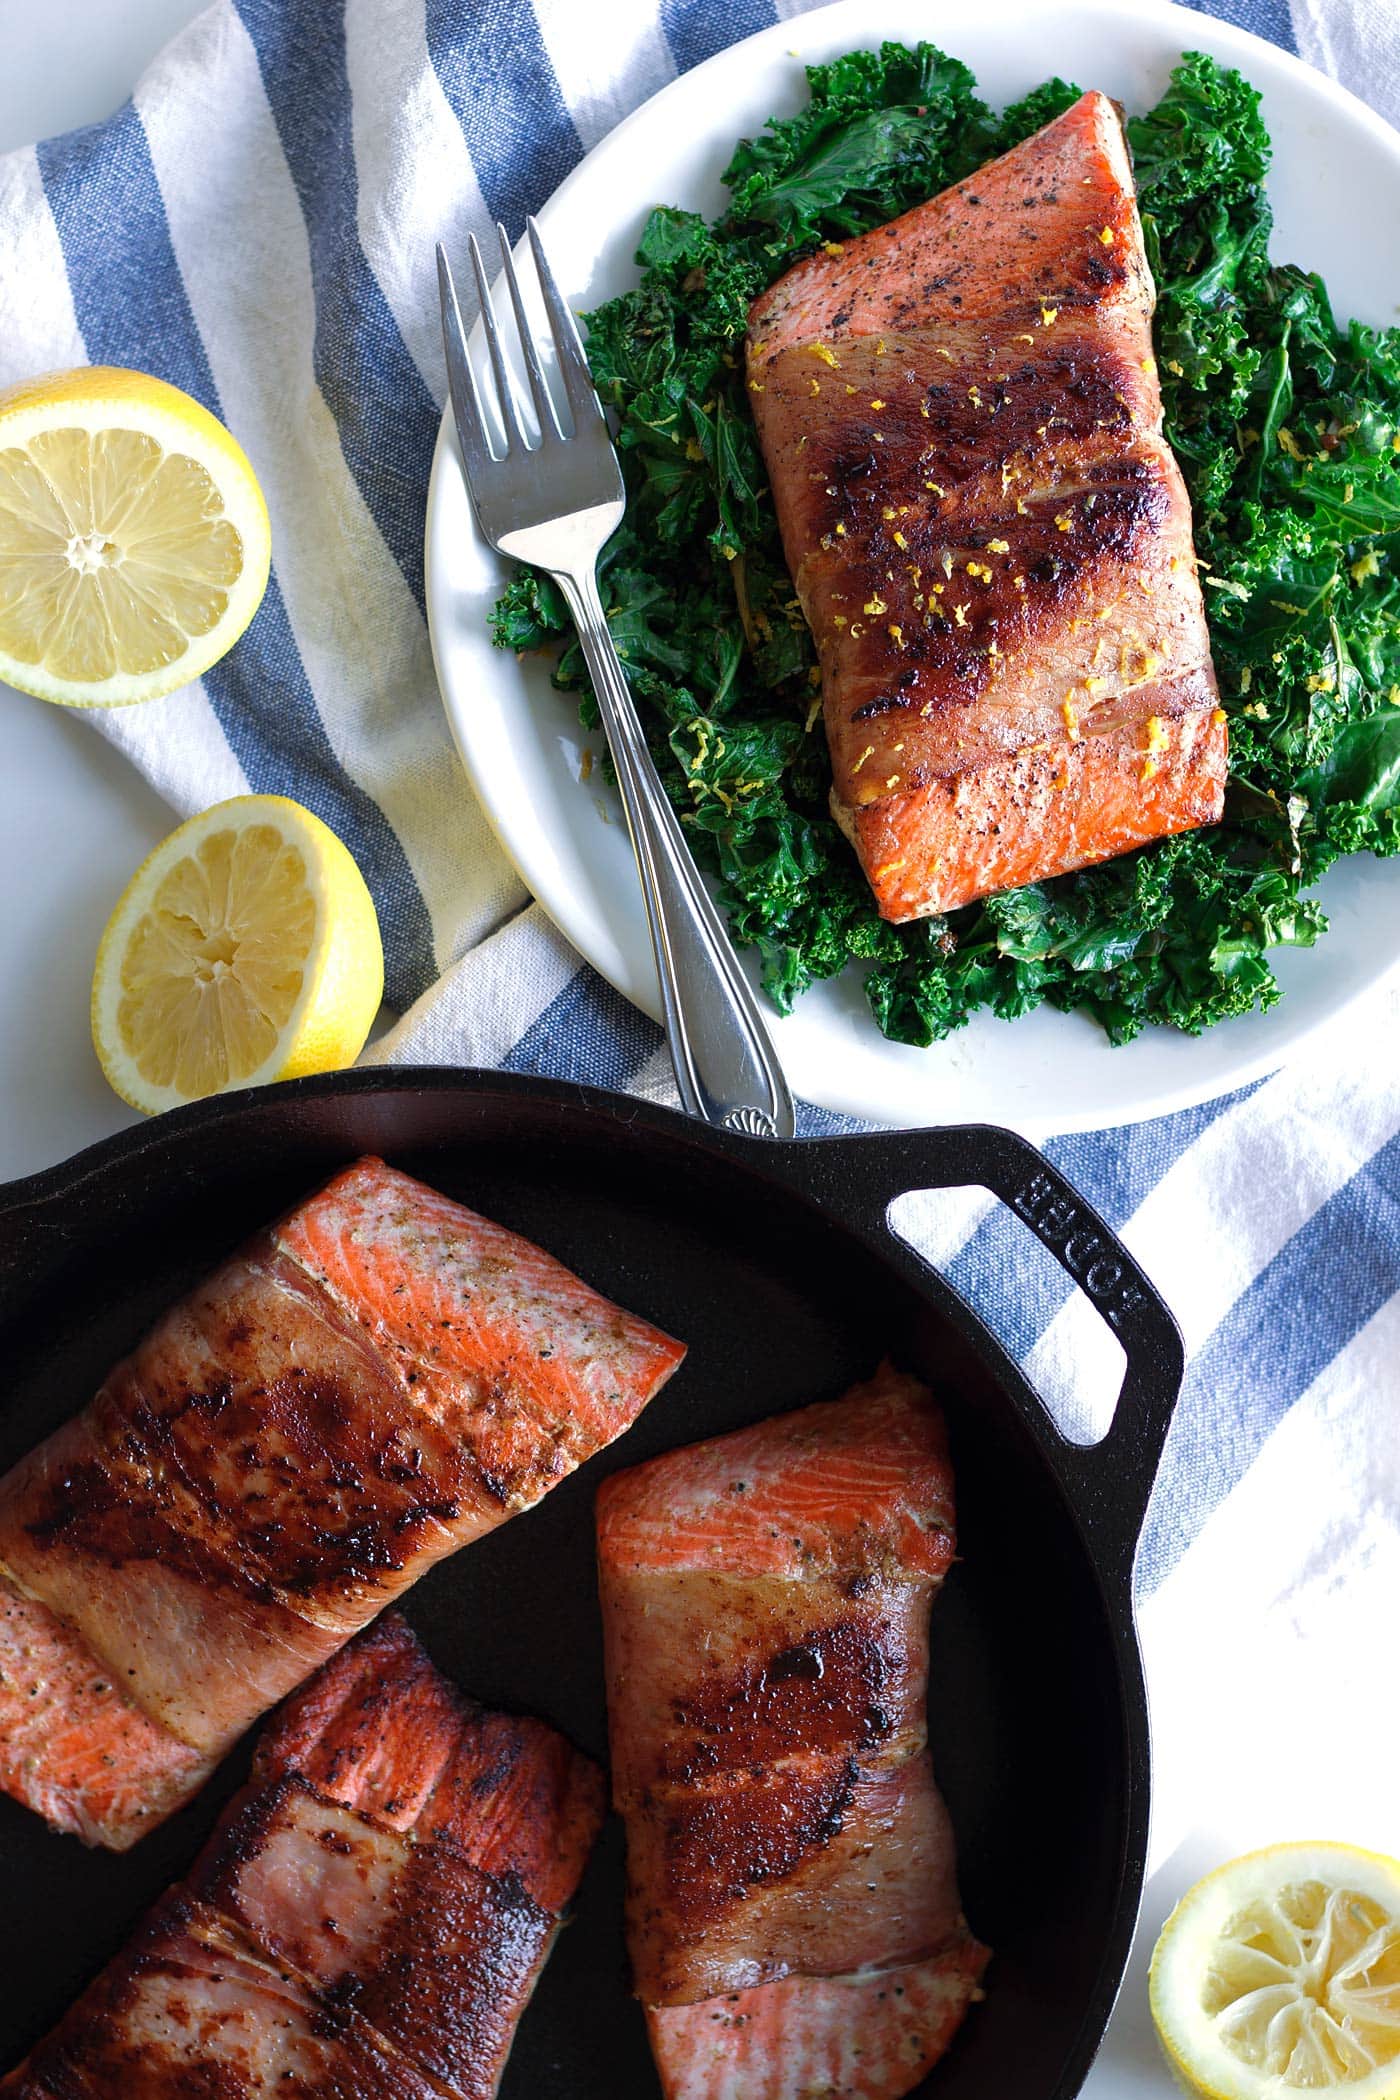 A healthy, elegant dinner in only 25 minutes! This prosciutto-wrapped salmon recipe is paleo, low carb, and a great weeknight meal! This quick keto dinner recipe is perfect for when you’re in a hurry but want something special and delicious! #paleo #whole30 #lowcarb #keto #glutenfree #dairyfree #salmon #paleodinner #whole30dinner #ketodinner #whole30recipes #healthyeating #sockeyesalmon #kale #lowcarbdinner #lemonpepper #seafooddinner #mealprep #sustainableseafood #mealprepideas